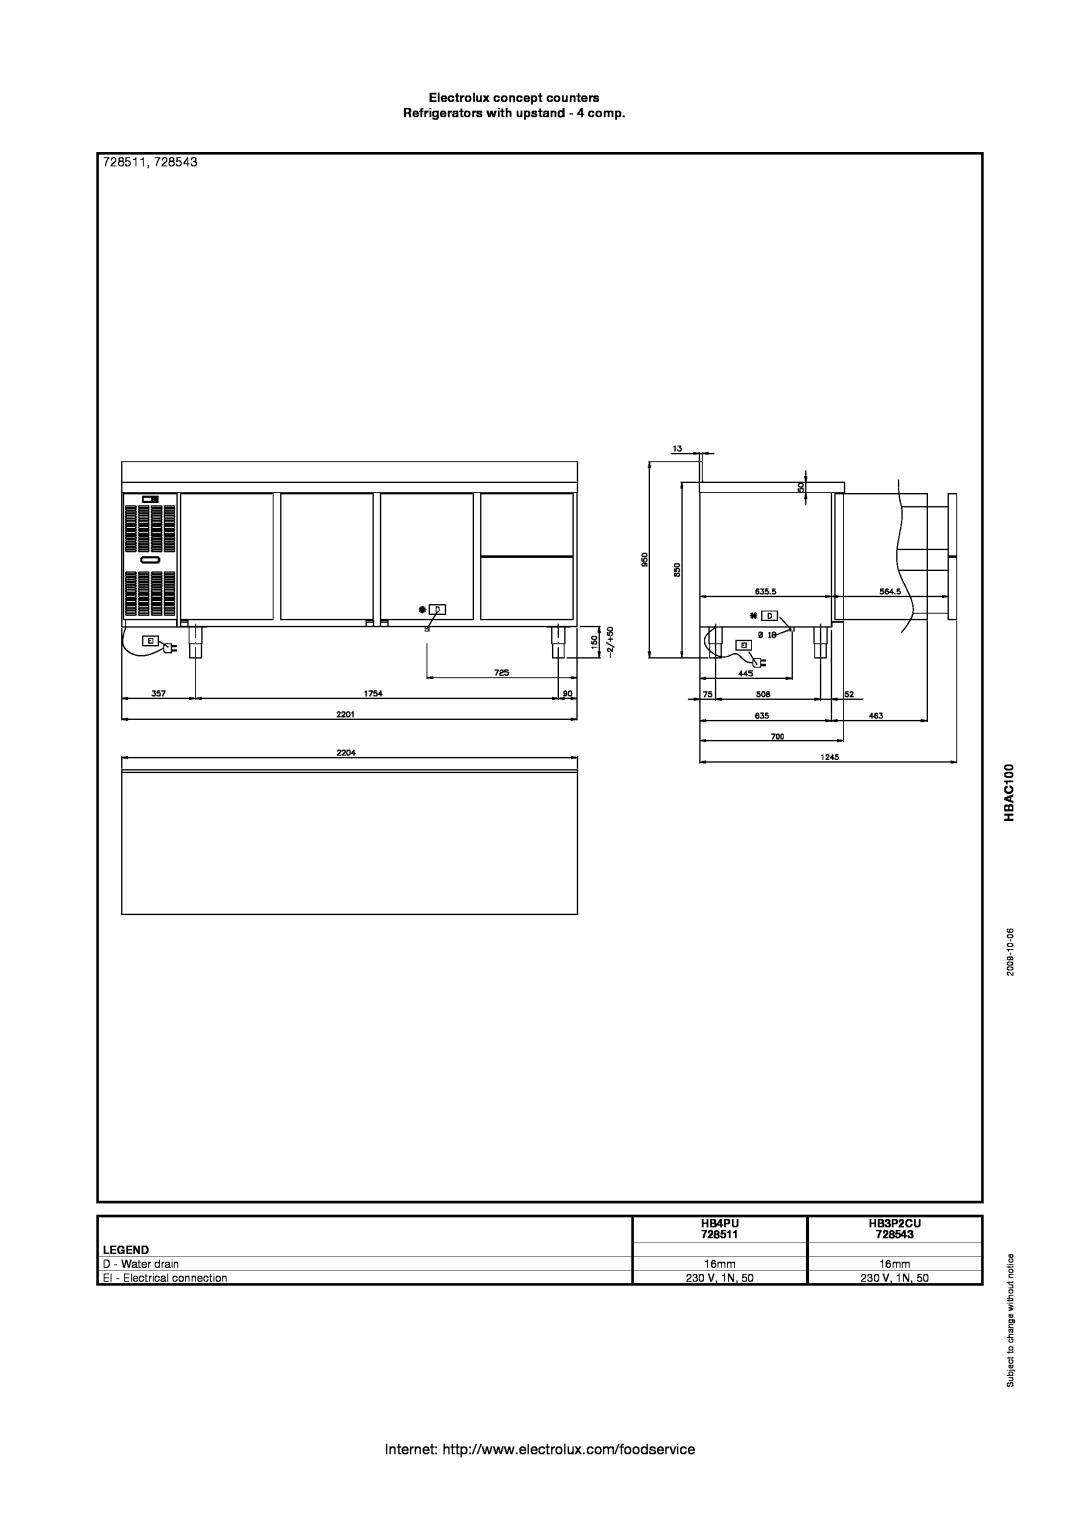 Electrolux HB3P2CU manual 728511, Electrolux concept counters Refrigerators with upstand - 4 comp, HBAC100, HB4PU, 728543 